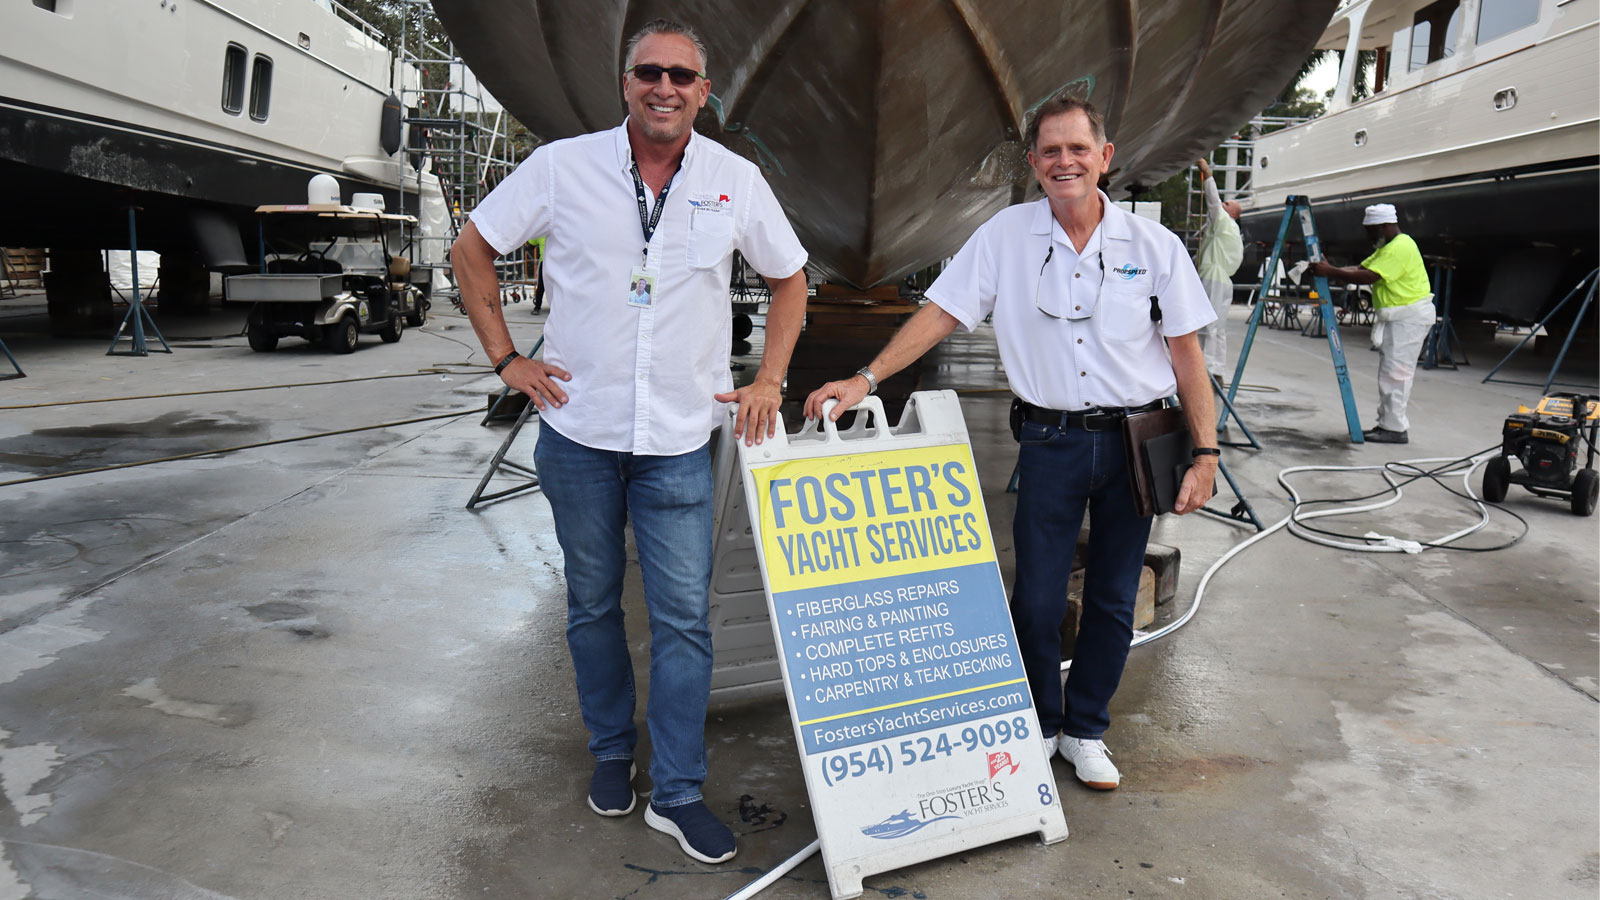 Propspeed's Mark Billingsley and Foster's Yacht Services Dennis Foster